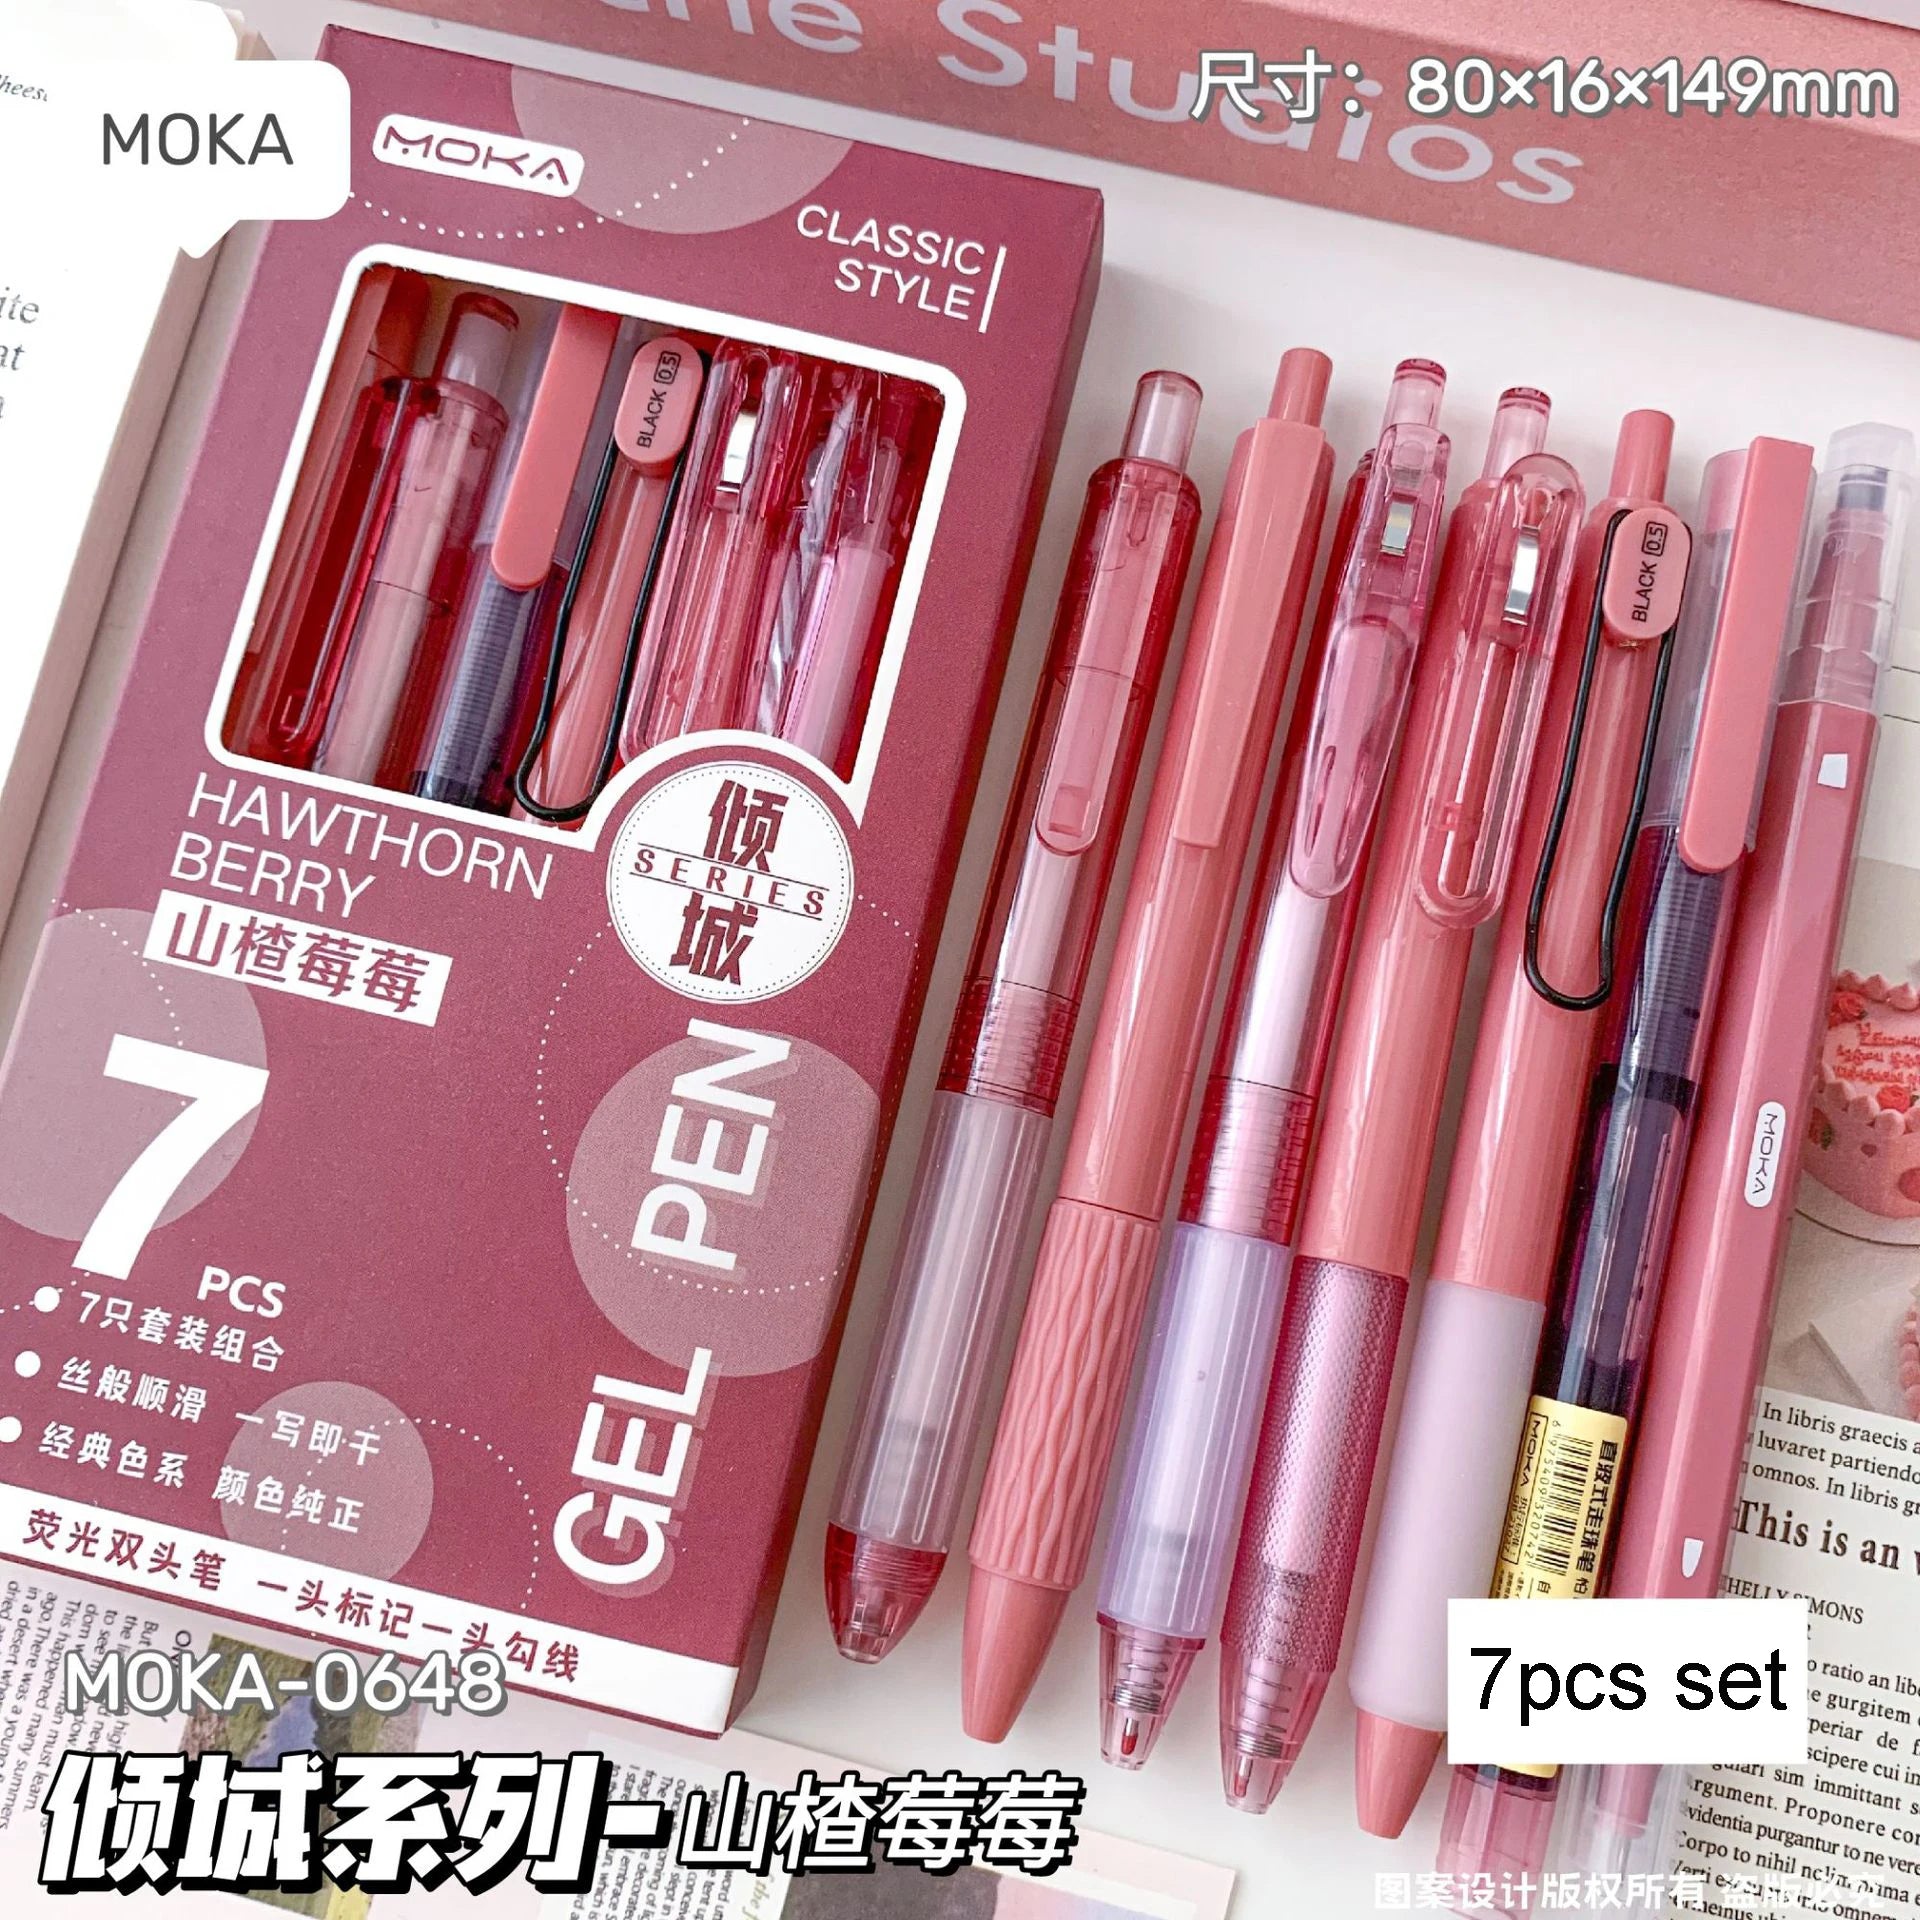 7pcs Kawaii Pens Quick-Drying Ink Japanese Stationery Pen Set Aesthetic Stationery School Supplies Ballpoint Pen Back To School